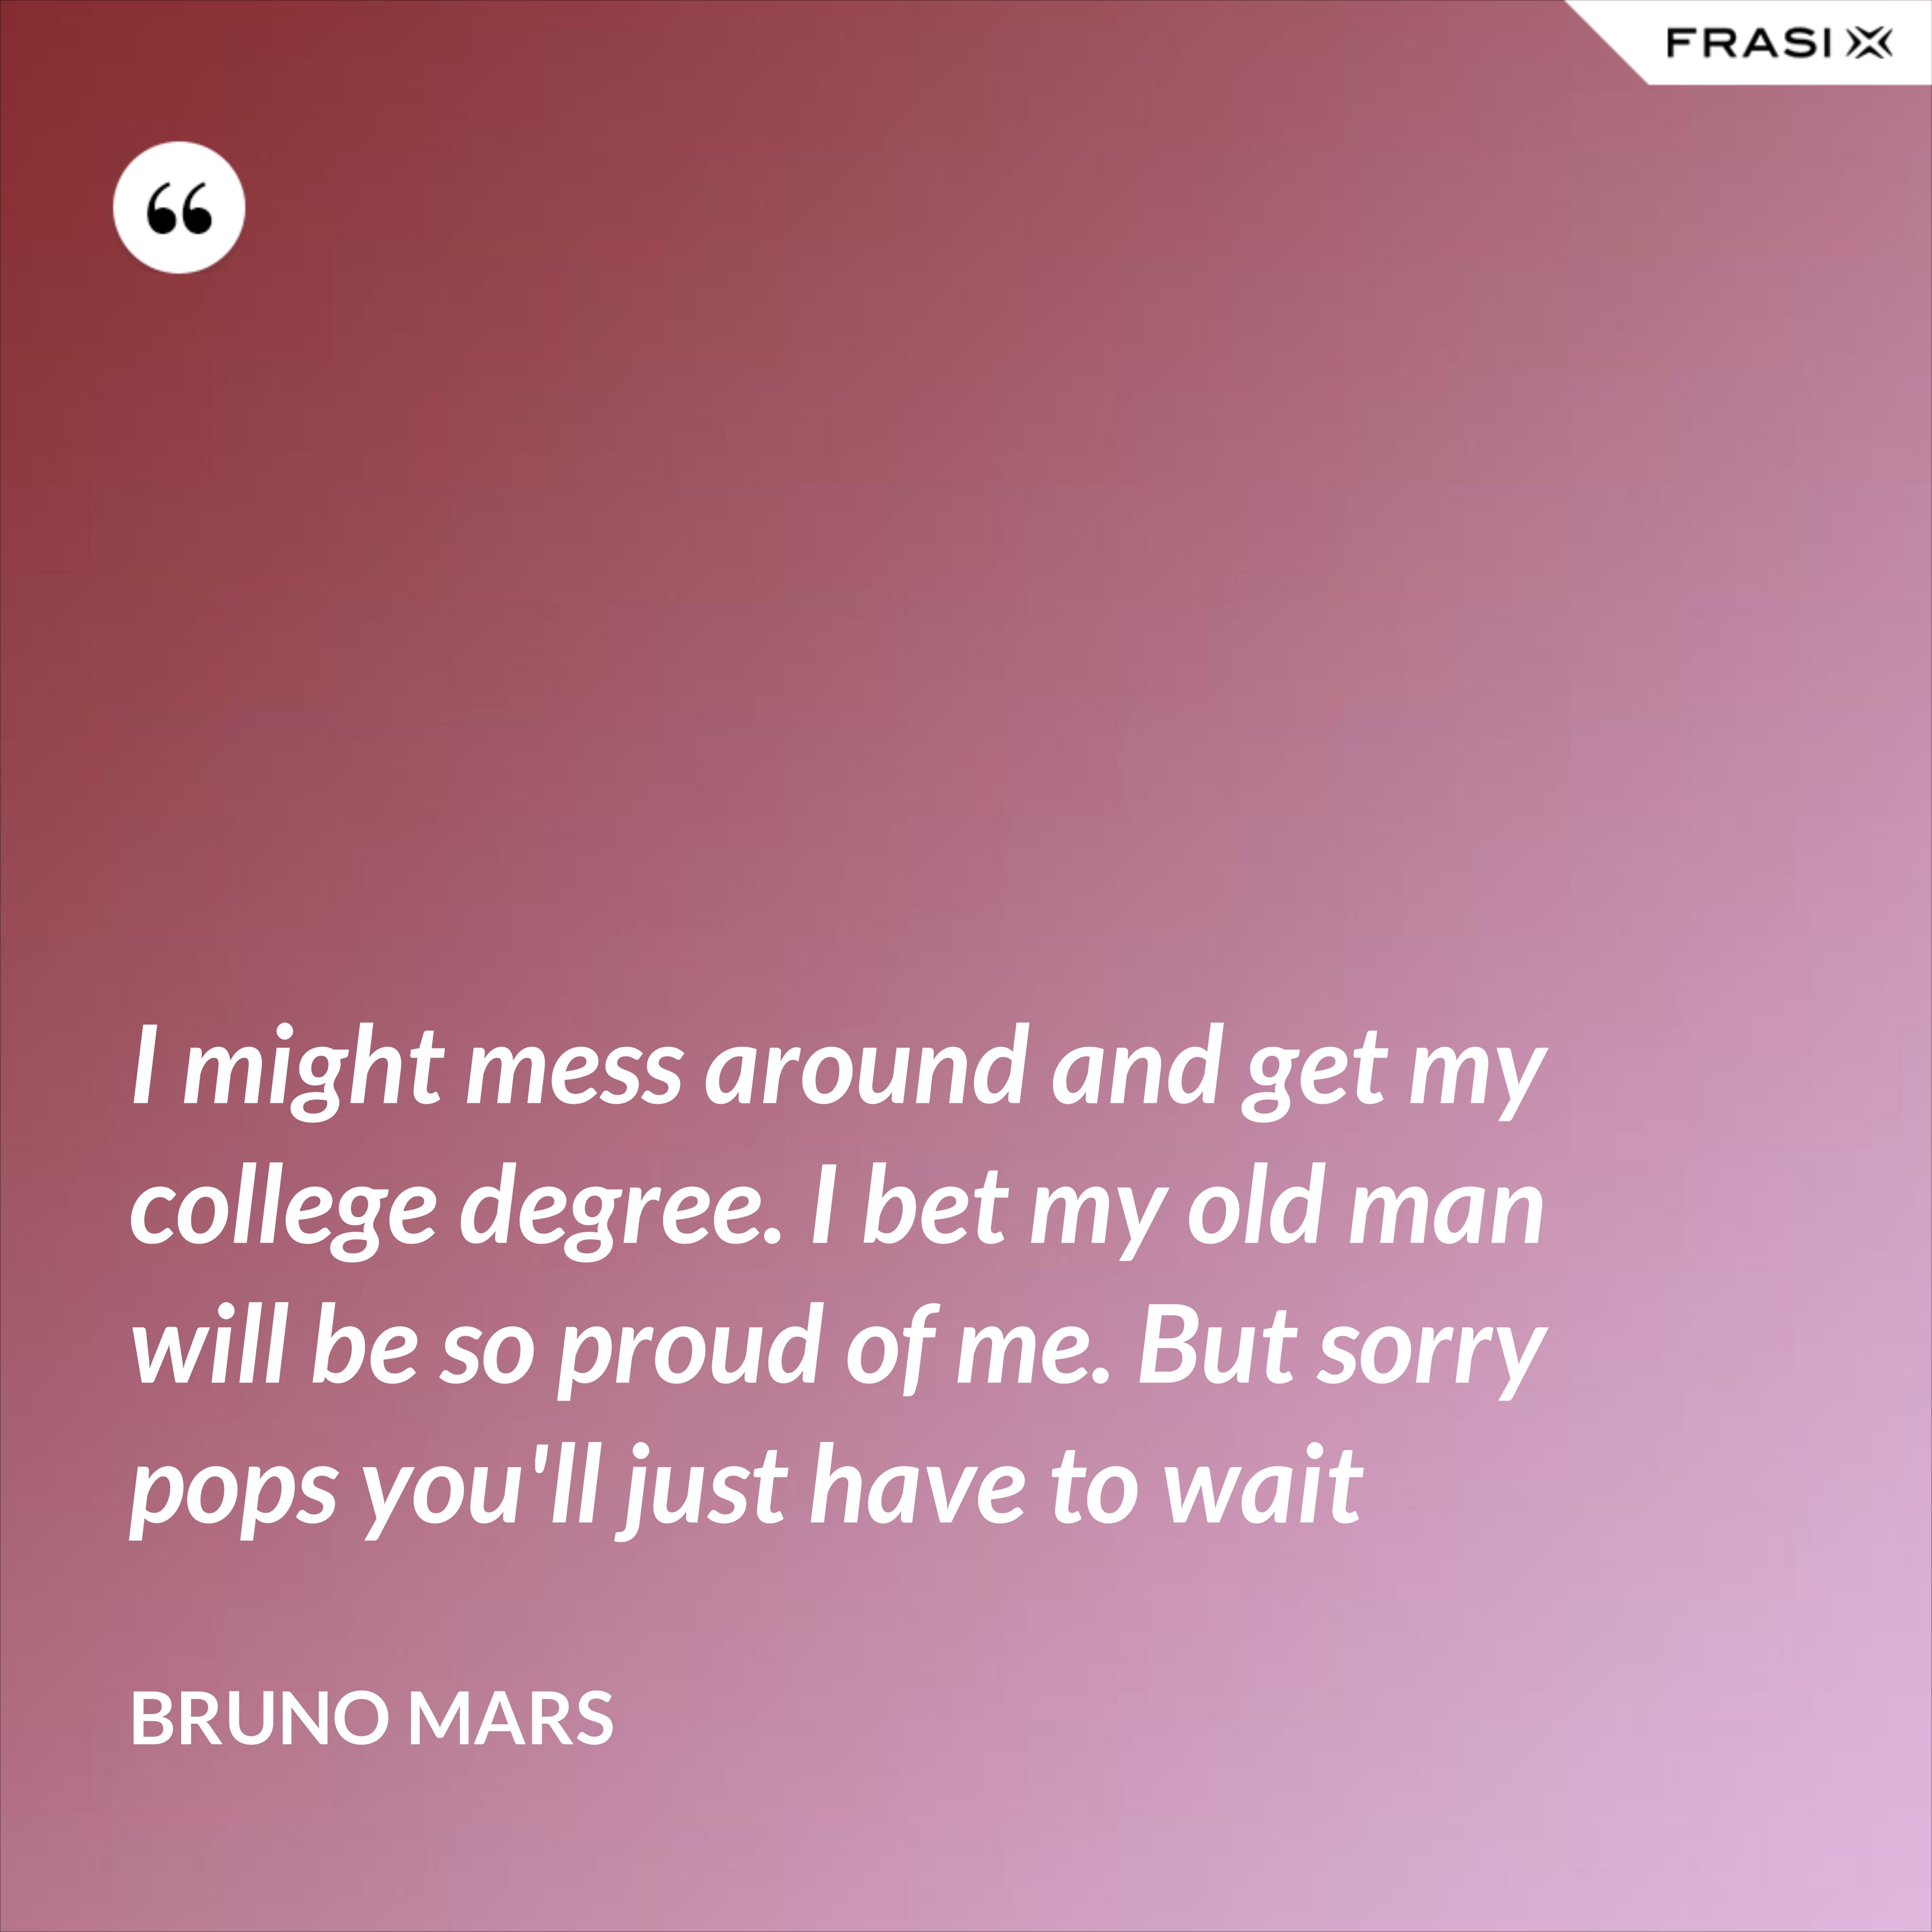 I might mess around and get my college degree. I bet my old man will be so proud of me. But sorry pops you'll just have to wait - Bruno Mars